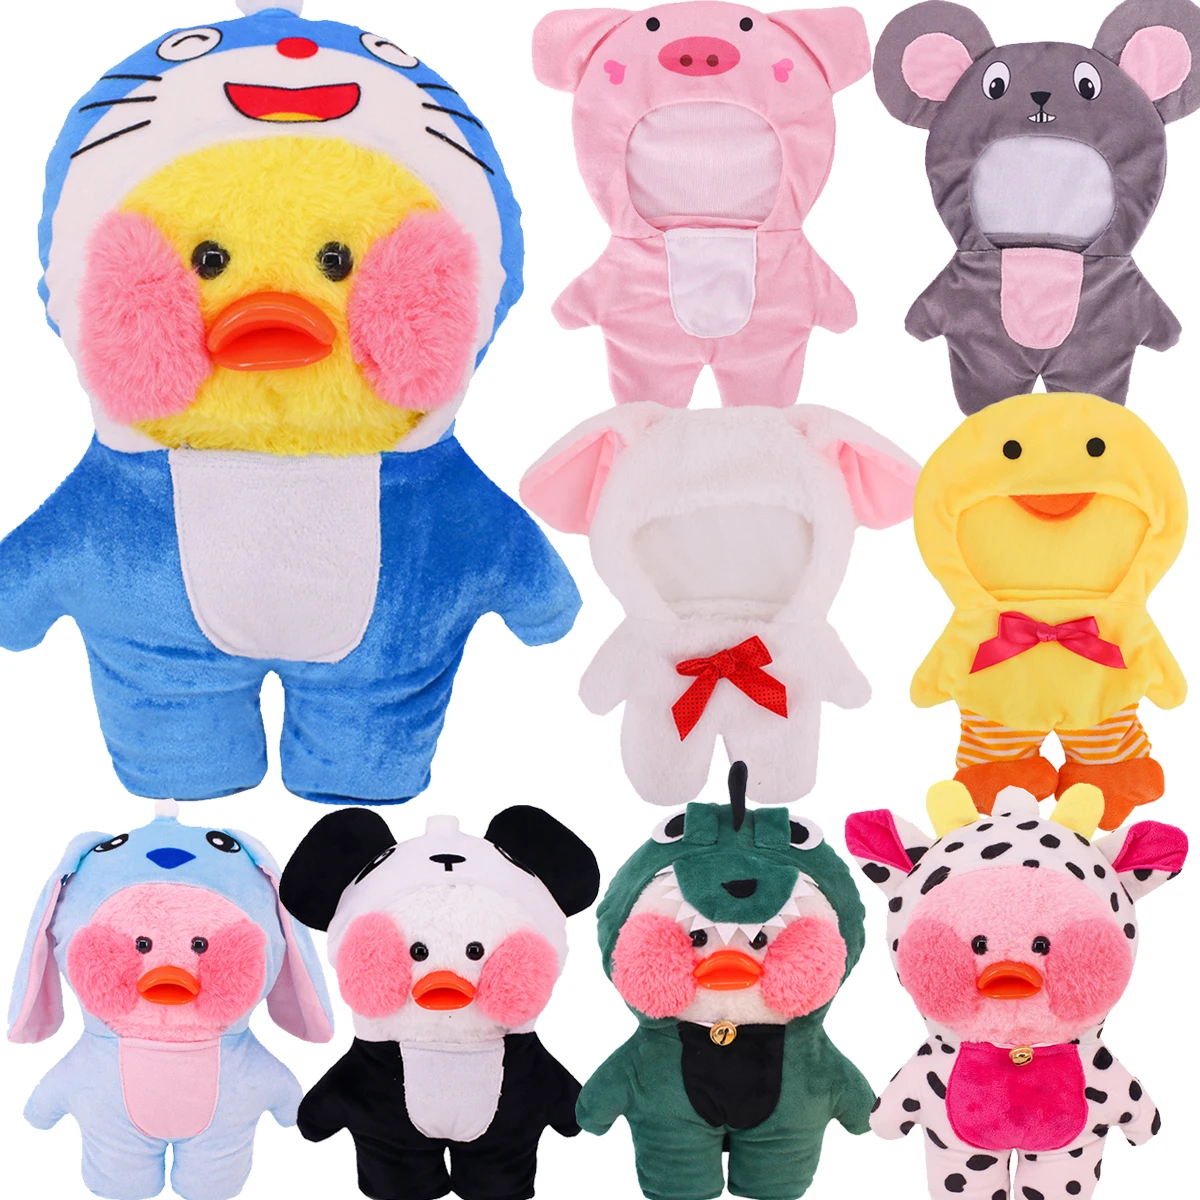 Animal Clothes For Duck 30cm lalafanfan Duck Kawaii Plush Toy Accessories Soft Animal Dolls Children's Toys Birthday Gifts